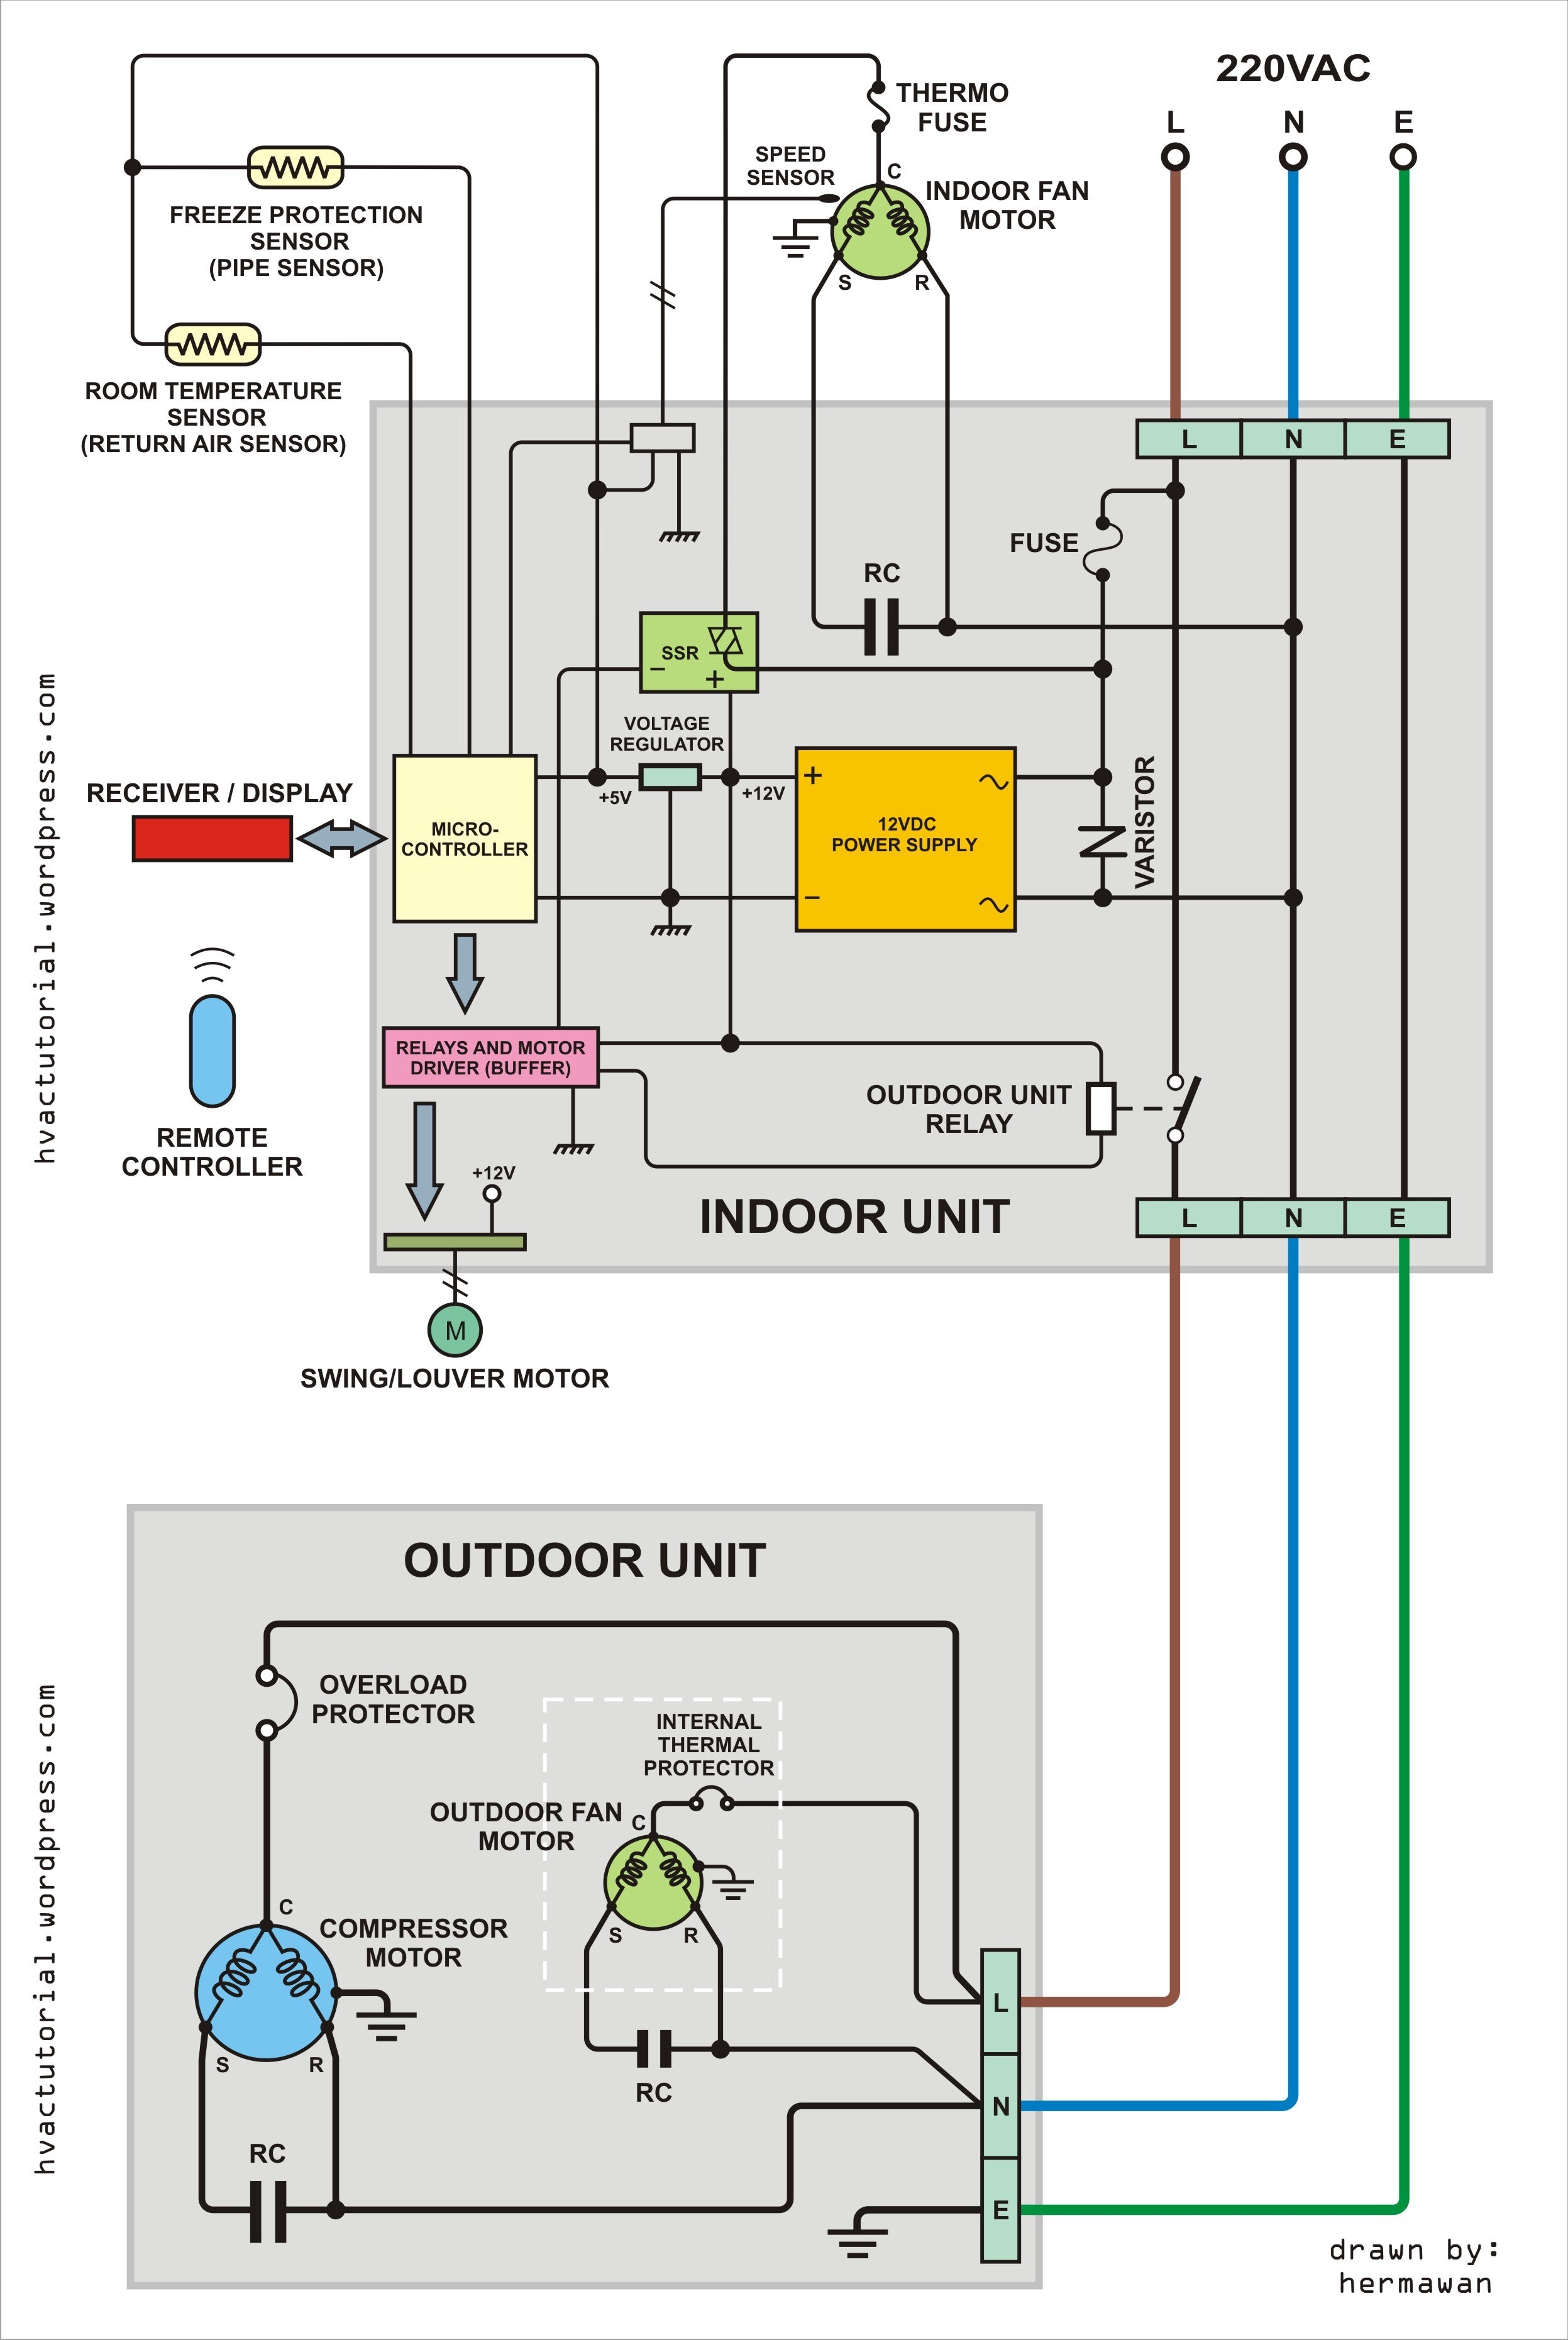 Split system air conditioner wiring diagram famous including